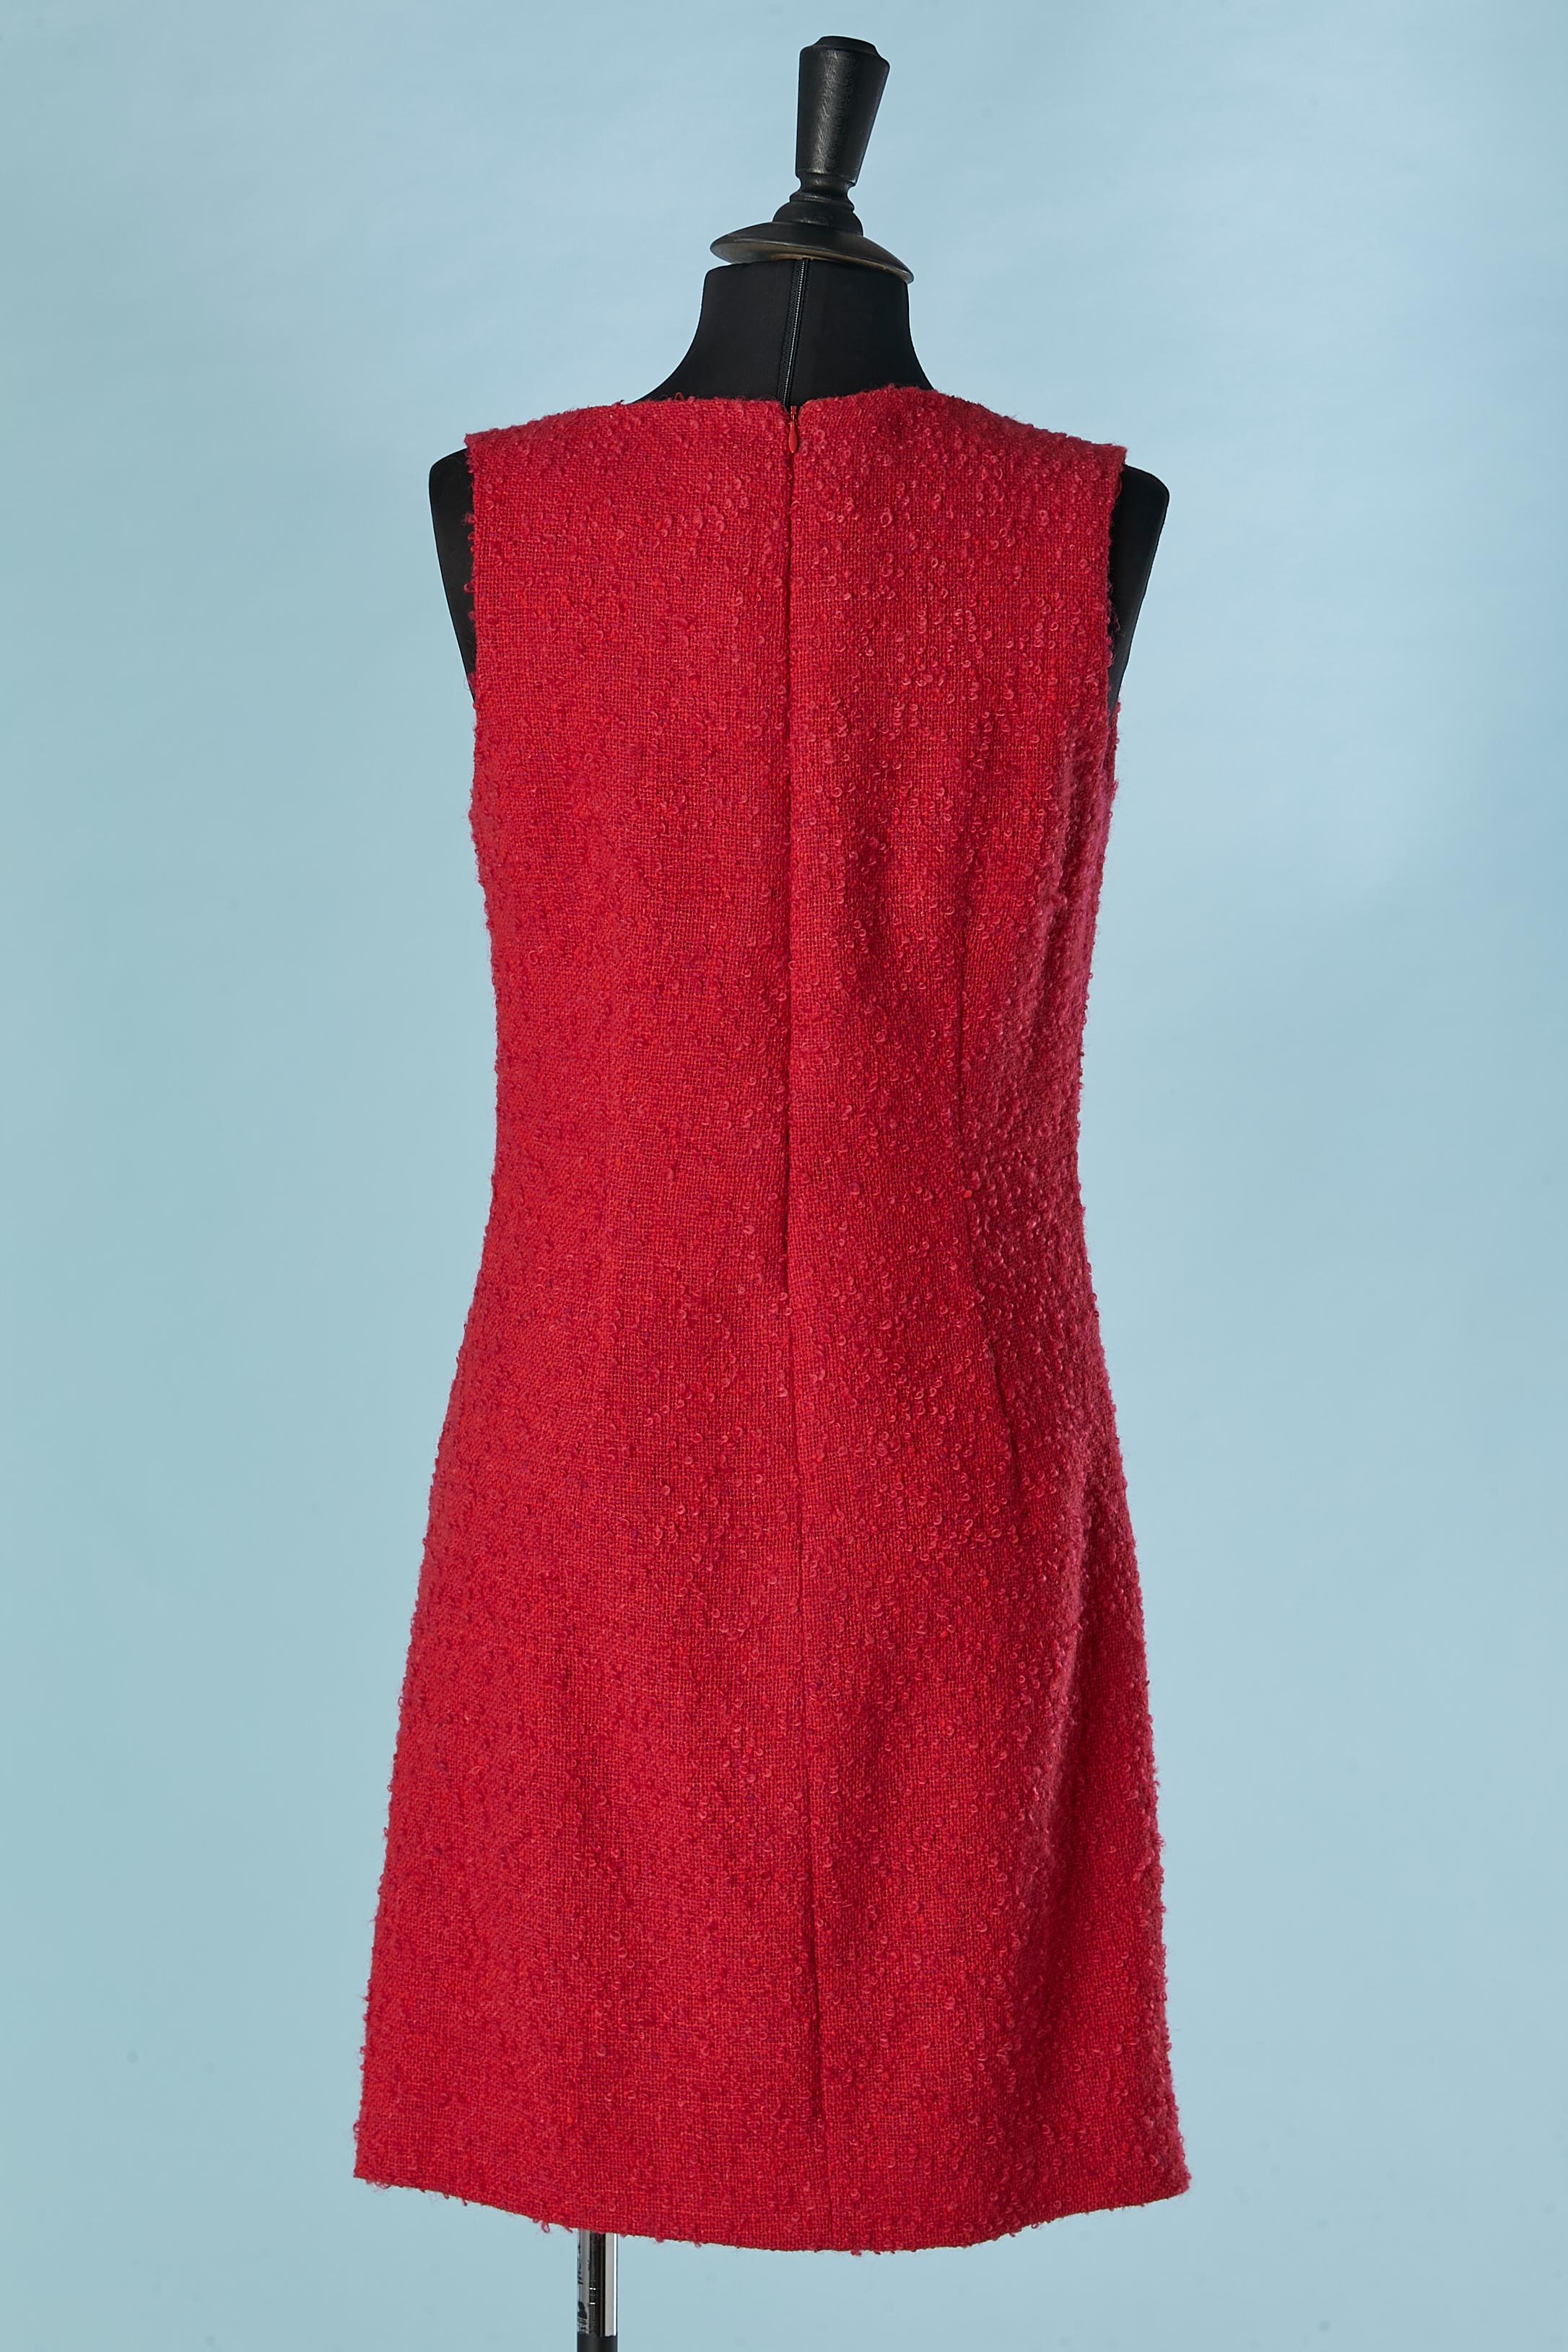 Red tweed bouclette sleeveless dress Versus By Gianni Versace For Sale 1